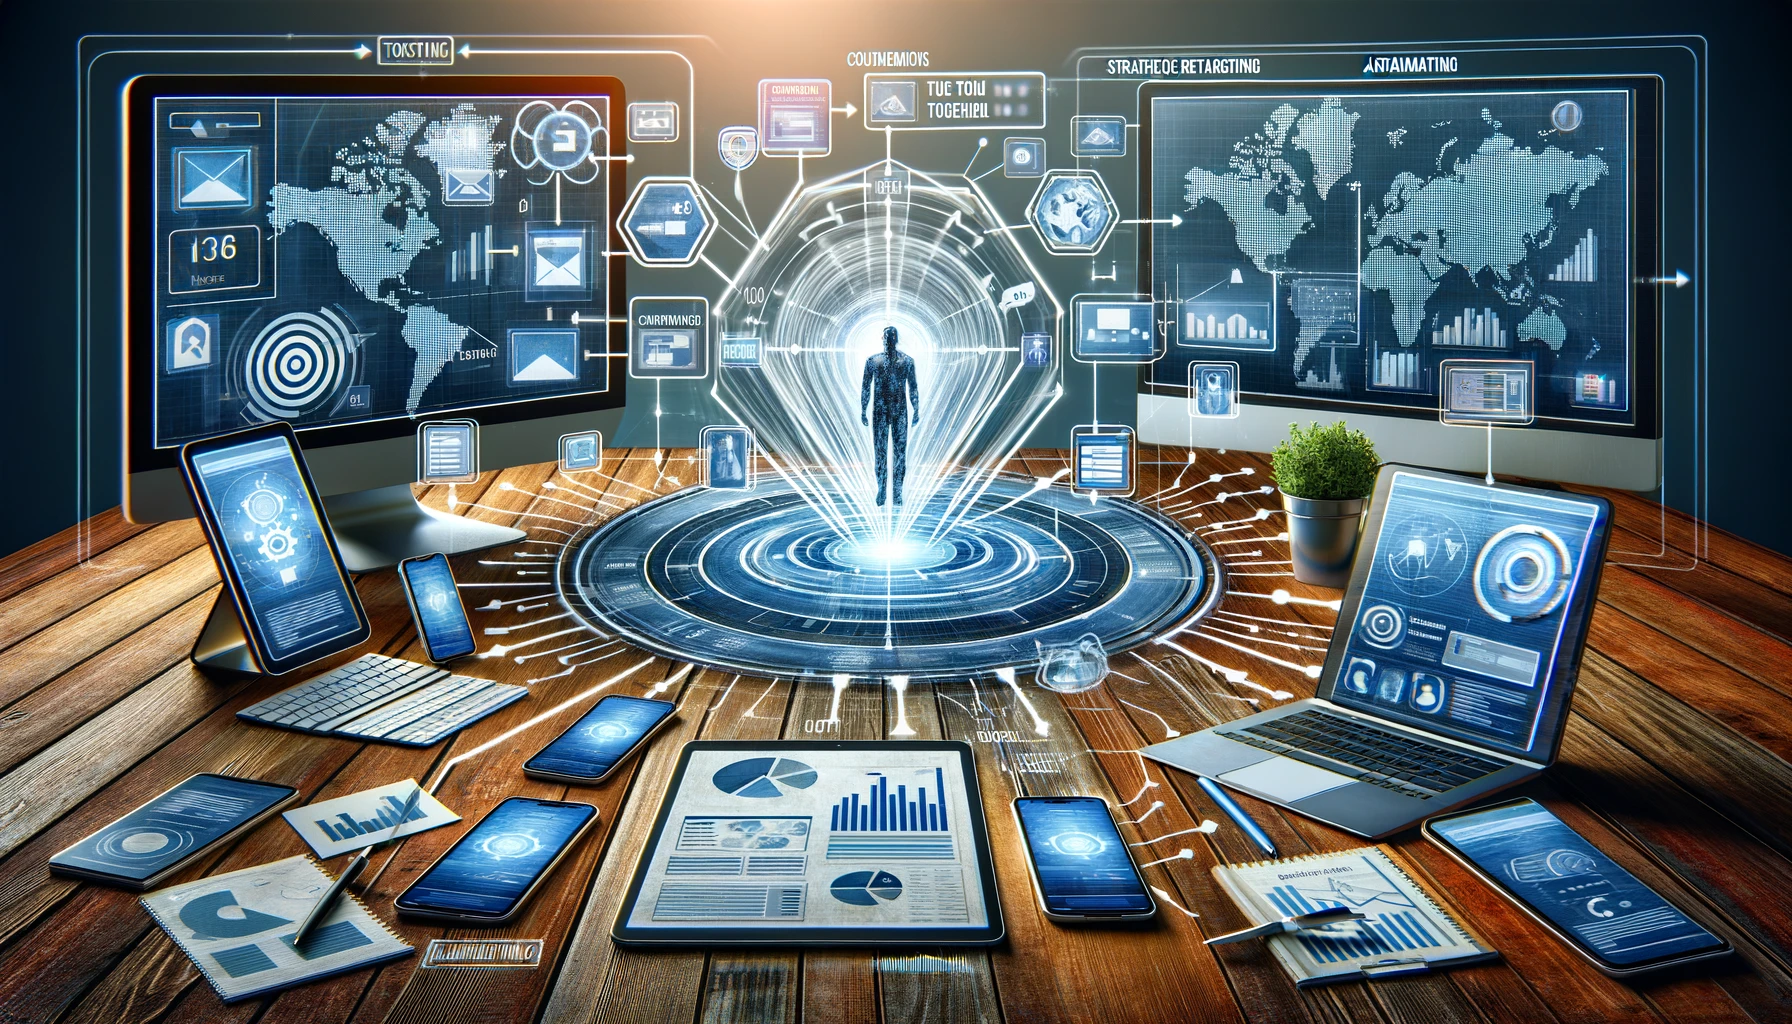 A digital marketing scenario showcasing 'Strategic Retargeting Campaign', with consumer avatars engaged across multiple devices, interconnected by strategic data flows against a backdrop of analytics and strategy charts.